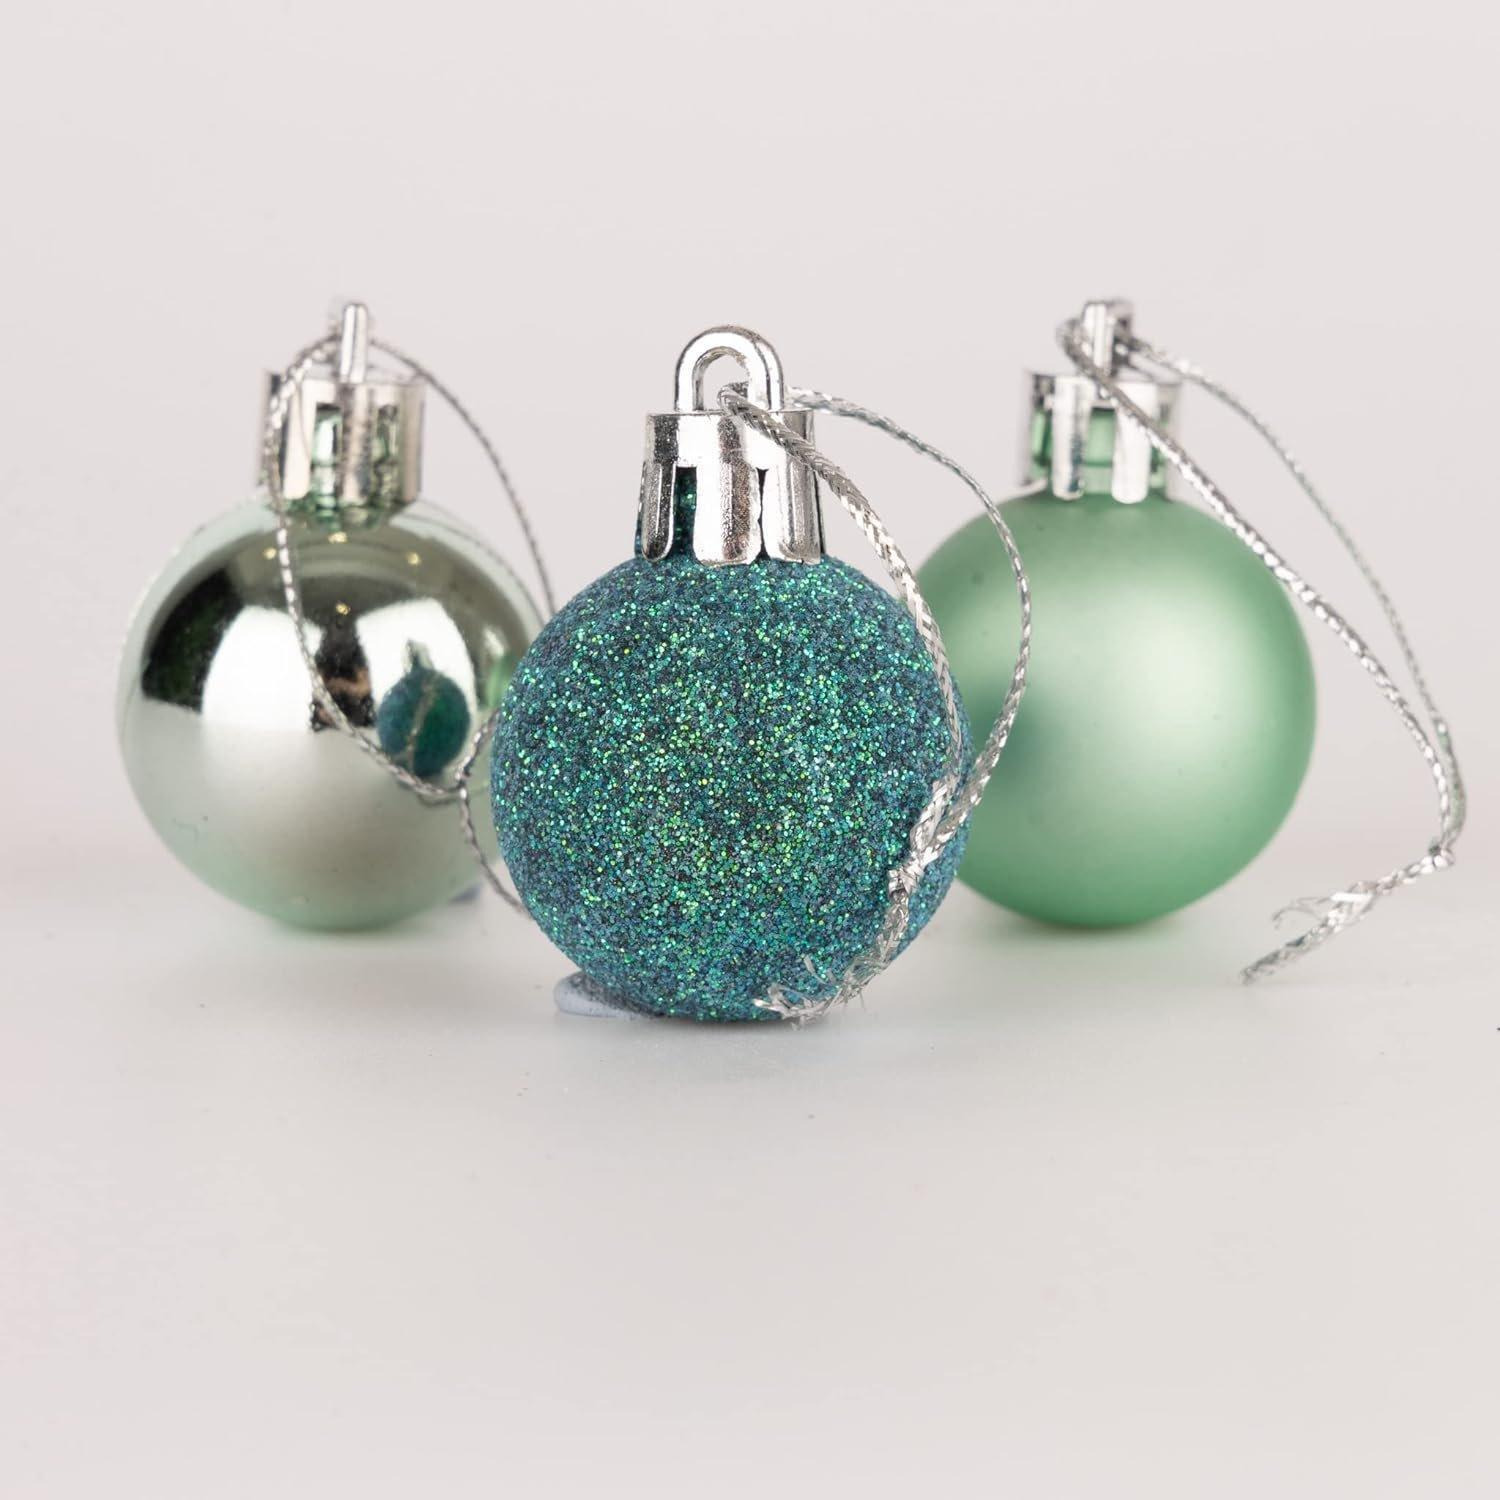 30mm/24Pcs Christmas Baubles Shatterproof Turquoise,Tree Decorations - image 1